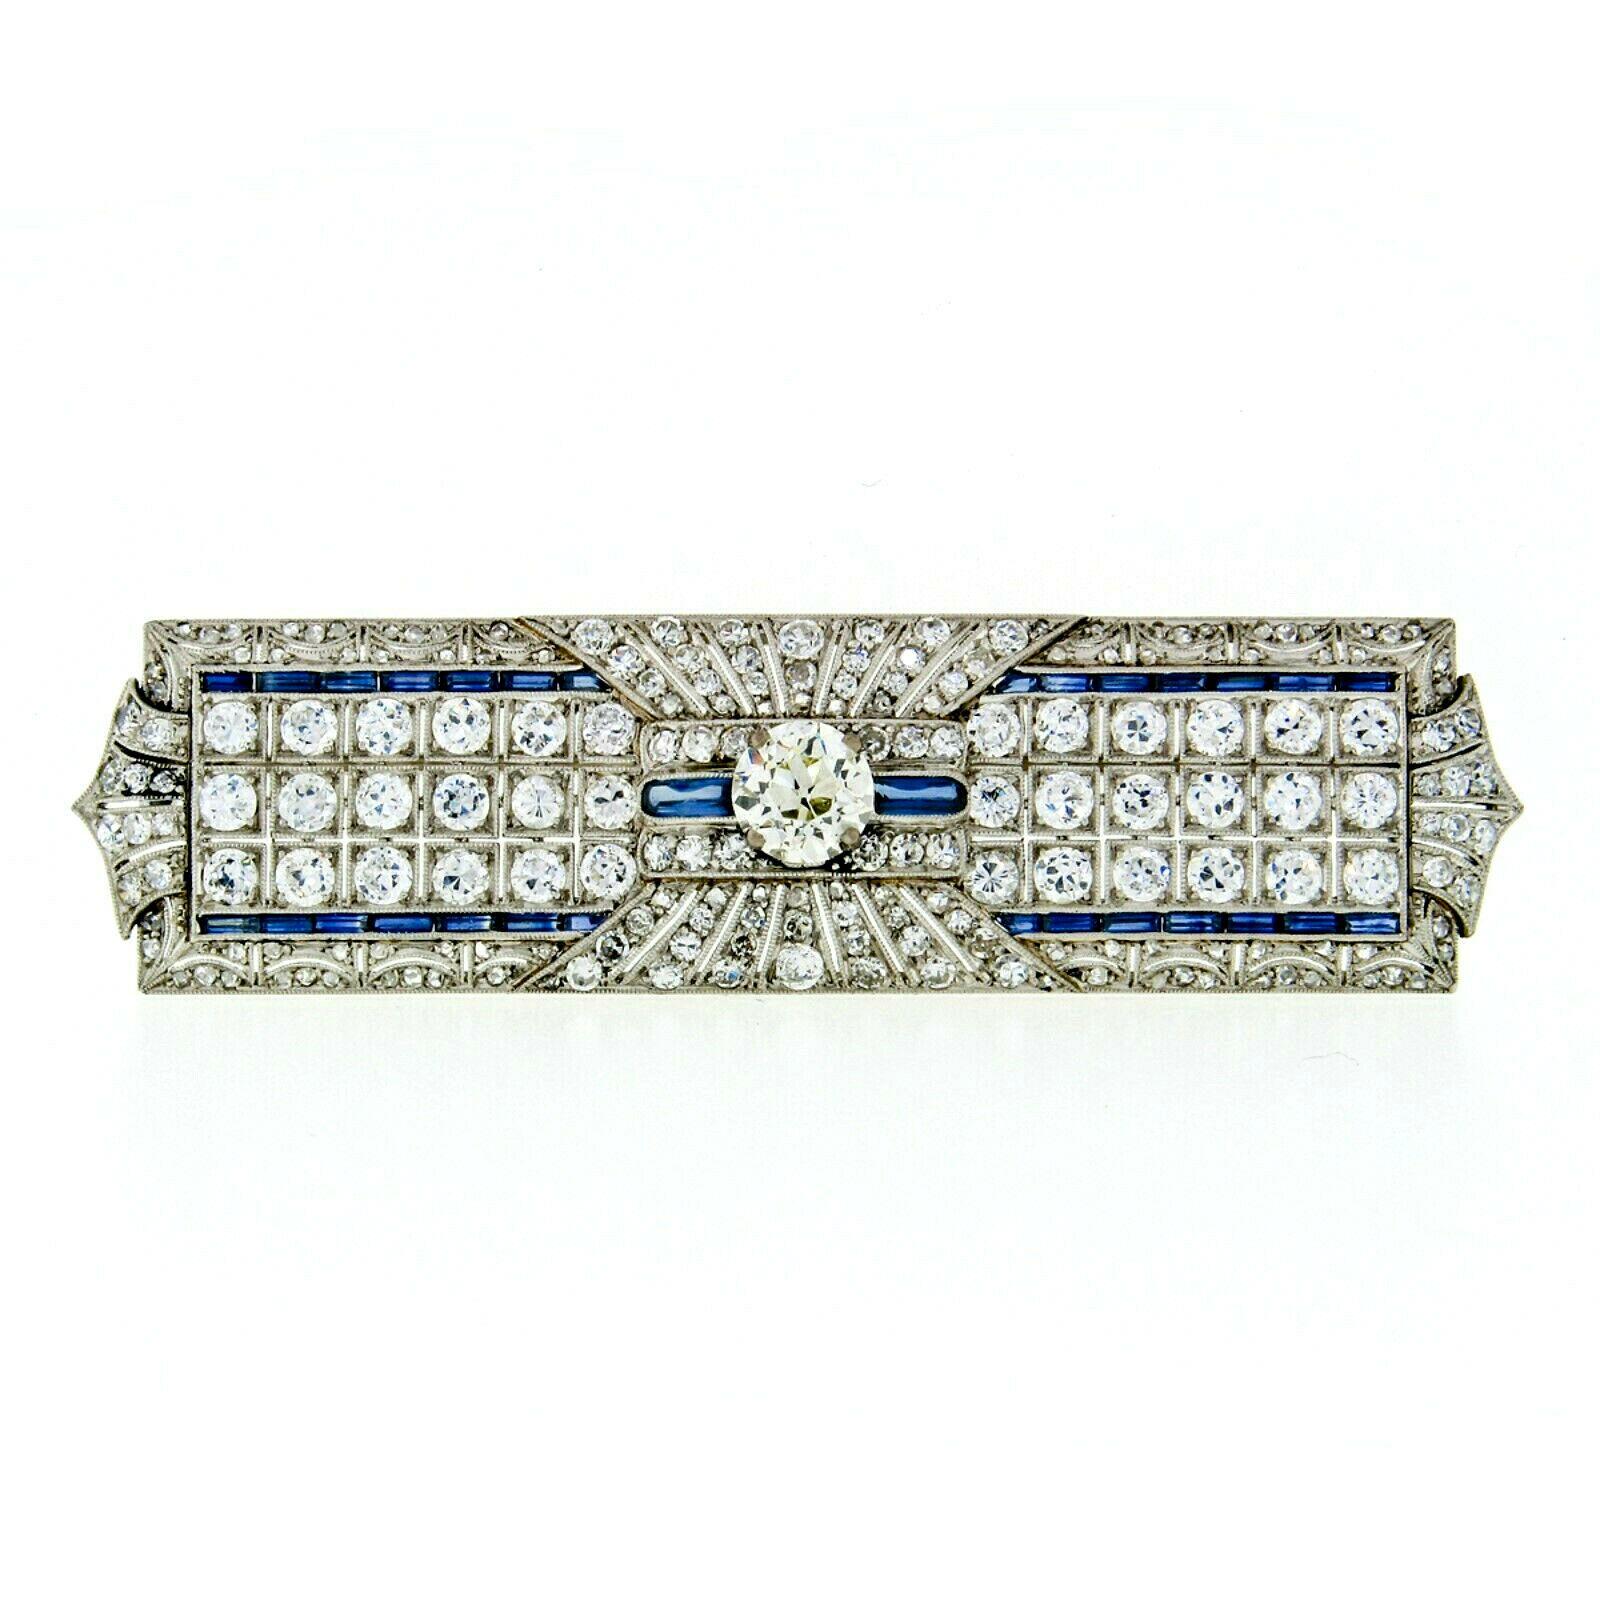 This magnificent antique brooch was crafted from solid .900 platinum during the art deco period. It features a large rectangular shape adorned open filigree work, milgrain etching, and over 7 carats of VERY FINE quality old cut diamonds. The center